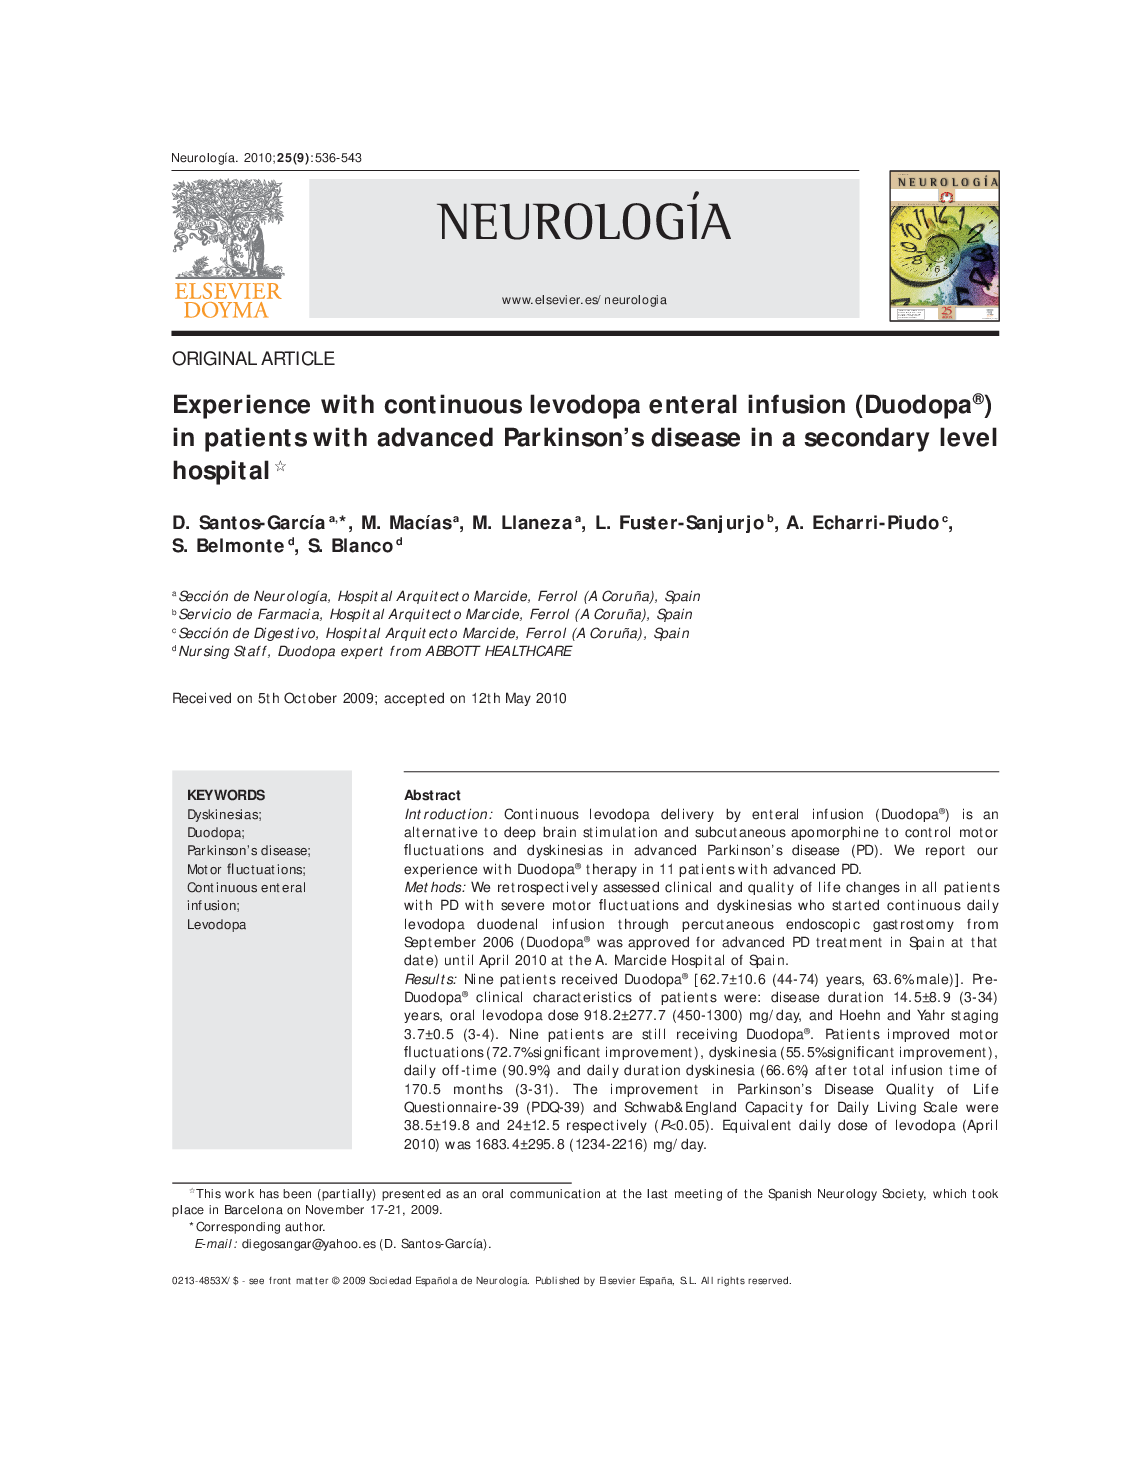 Experience with continuous levodopa enteral infusion (Duodopa®)in patients with advanced Parkinson's disease in a secondary level hospital 